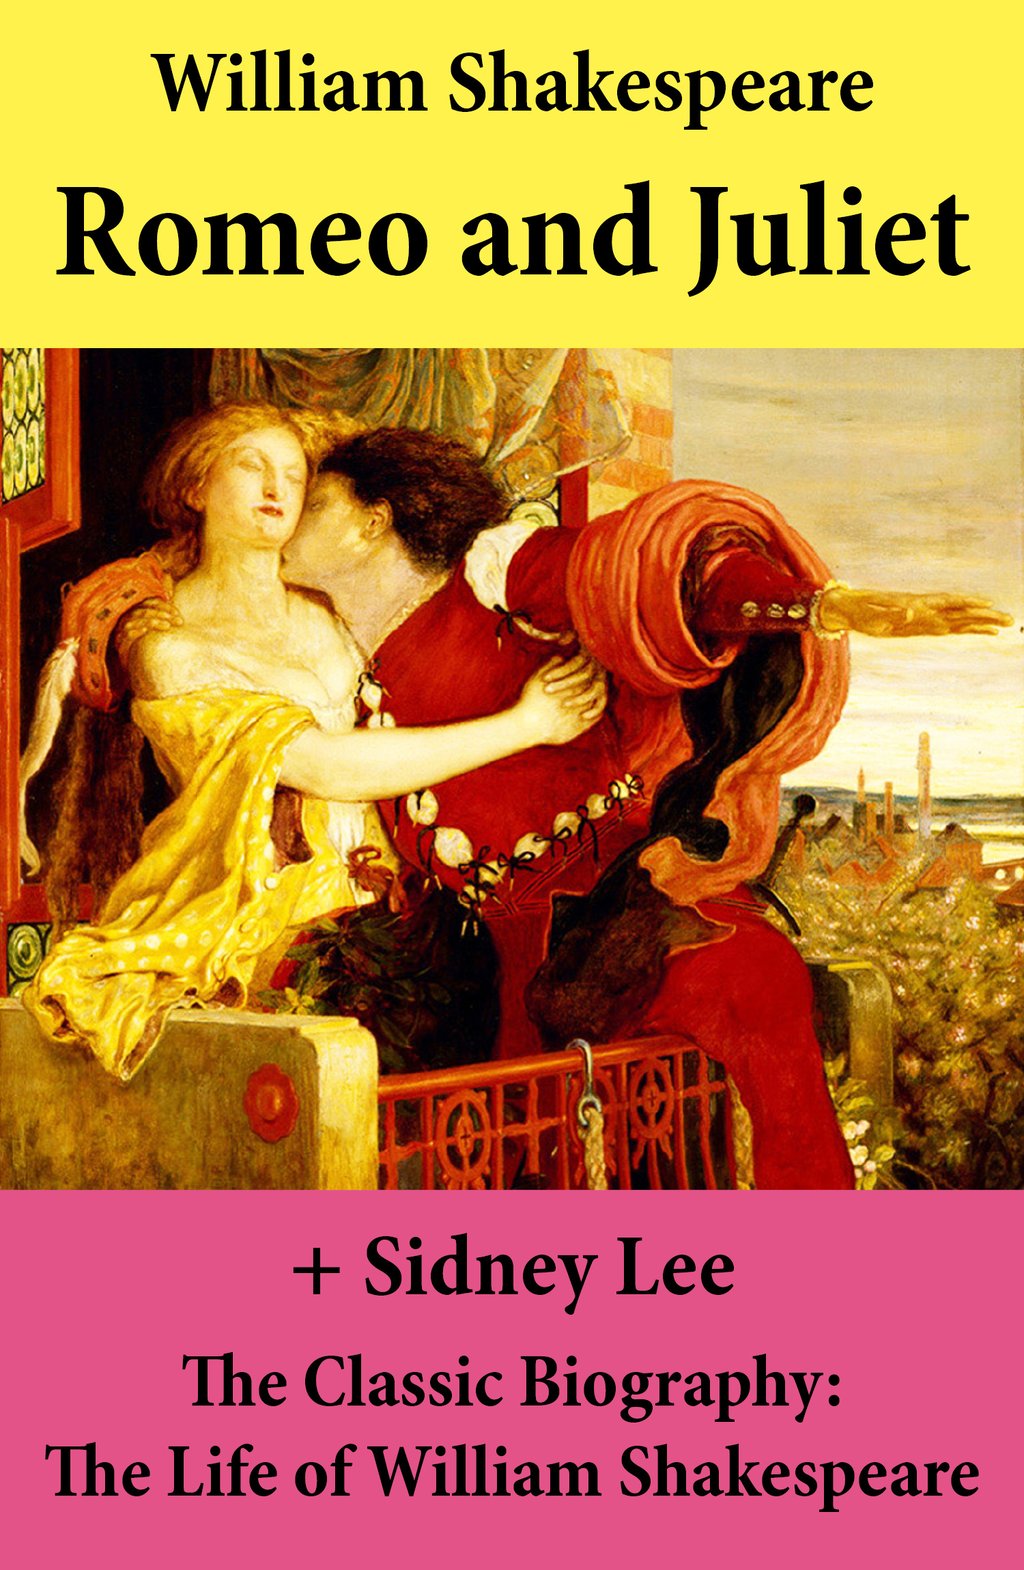 Romeo and Juliet (The Unabridged Play) + The Classic Biography: The Life of William Shakespeare - 3612220520526 - Ebook littérature | Cultura